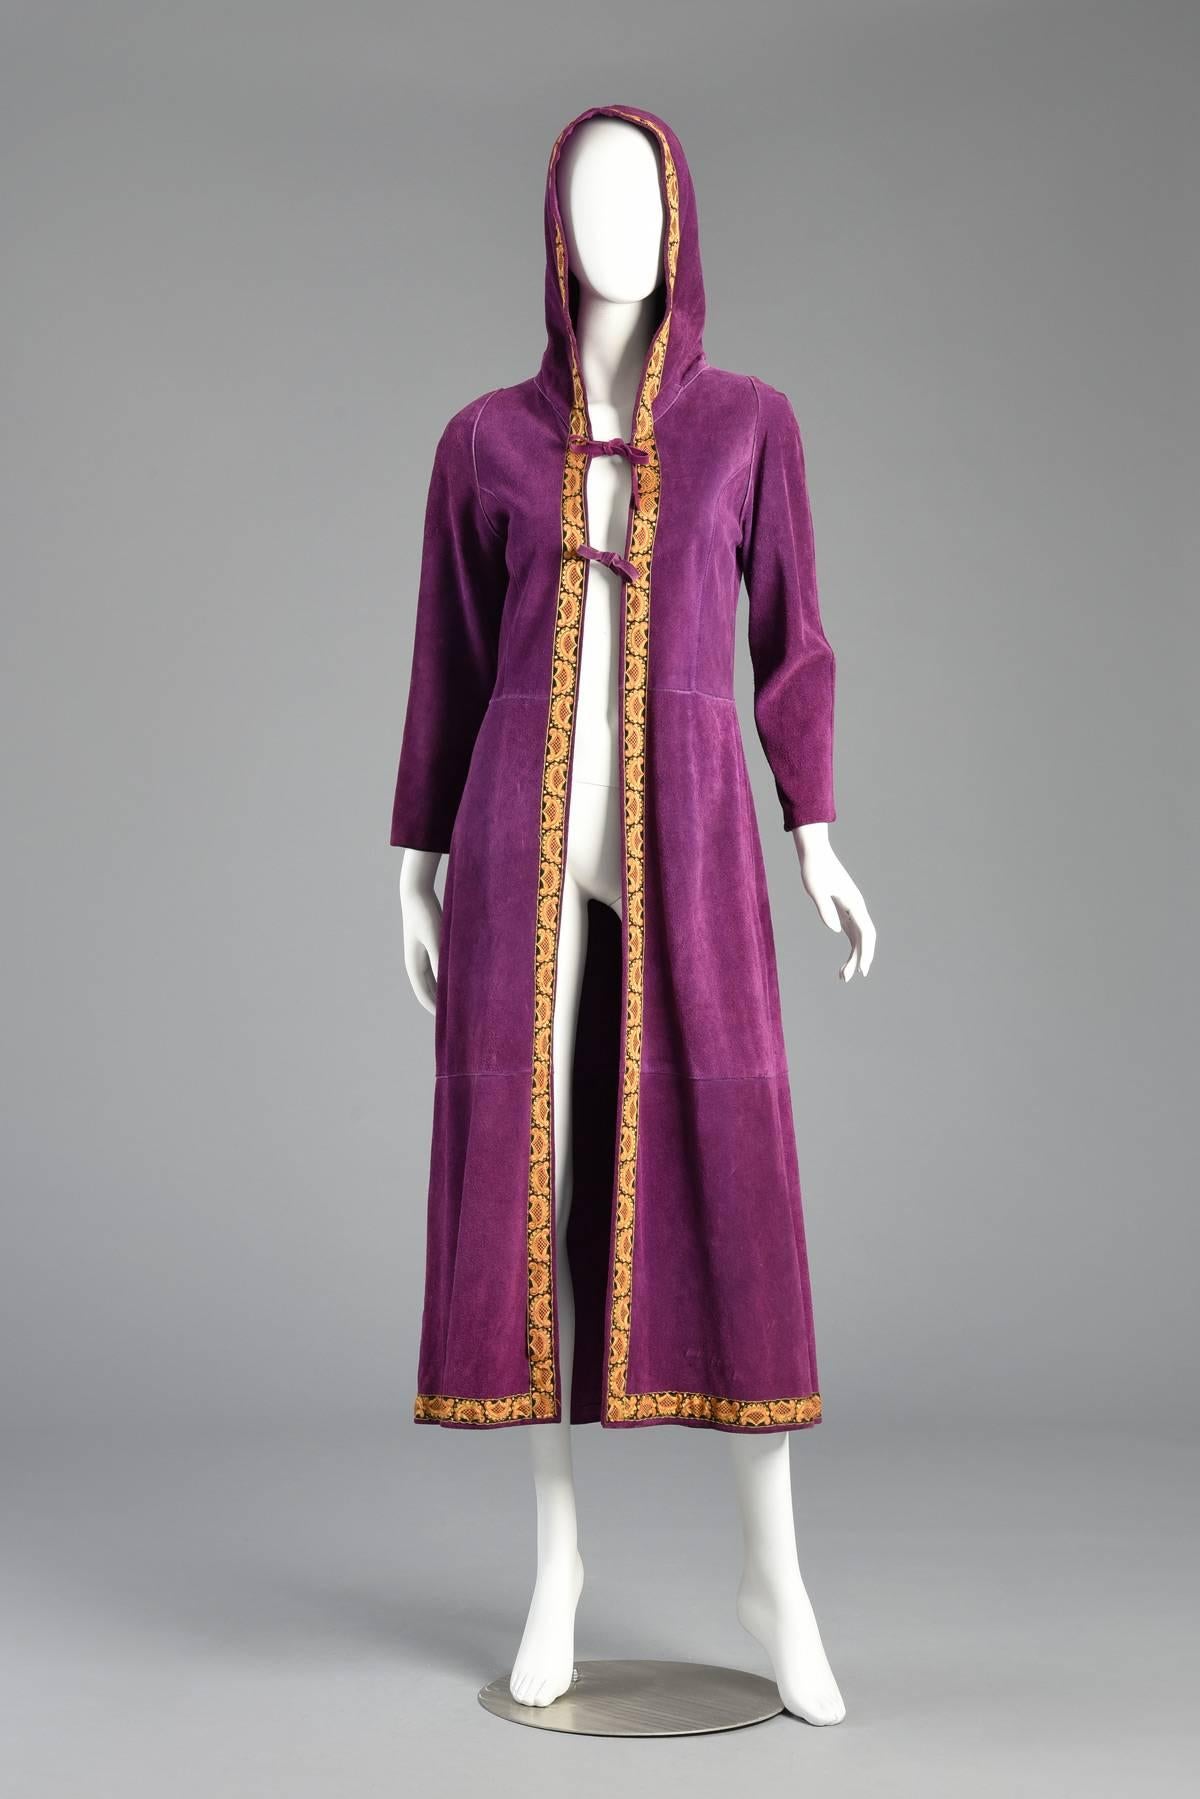 Bohemian dream coat! Phenomenal vintage 1960s purple suede leather hooded jacket. Such a rare and unique color. Soft and supple purple suede with gold tapestry trim. Sleek fit with hood and double tie-front closures. Freshly cleaned + conditioned.